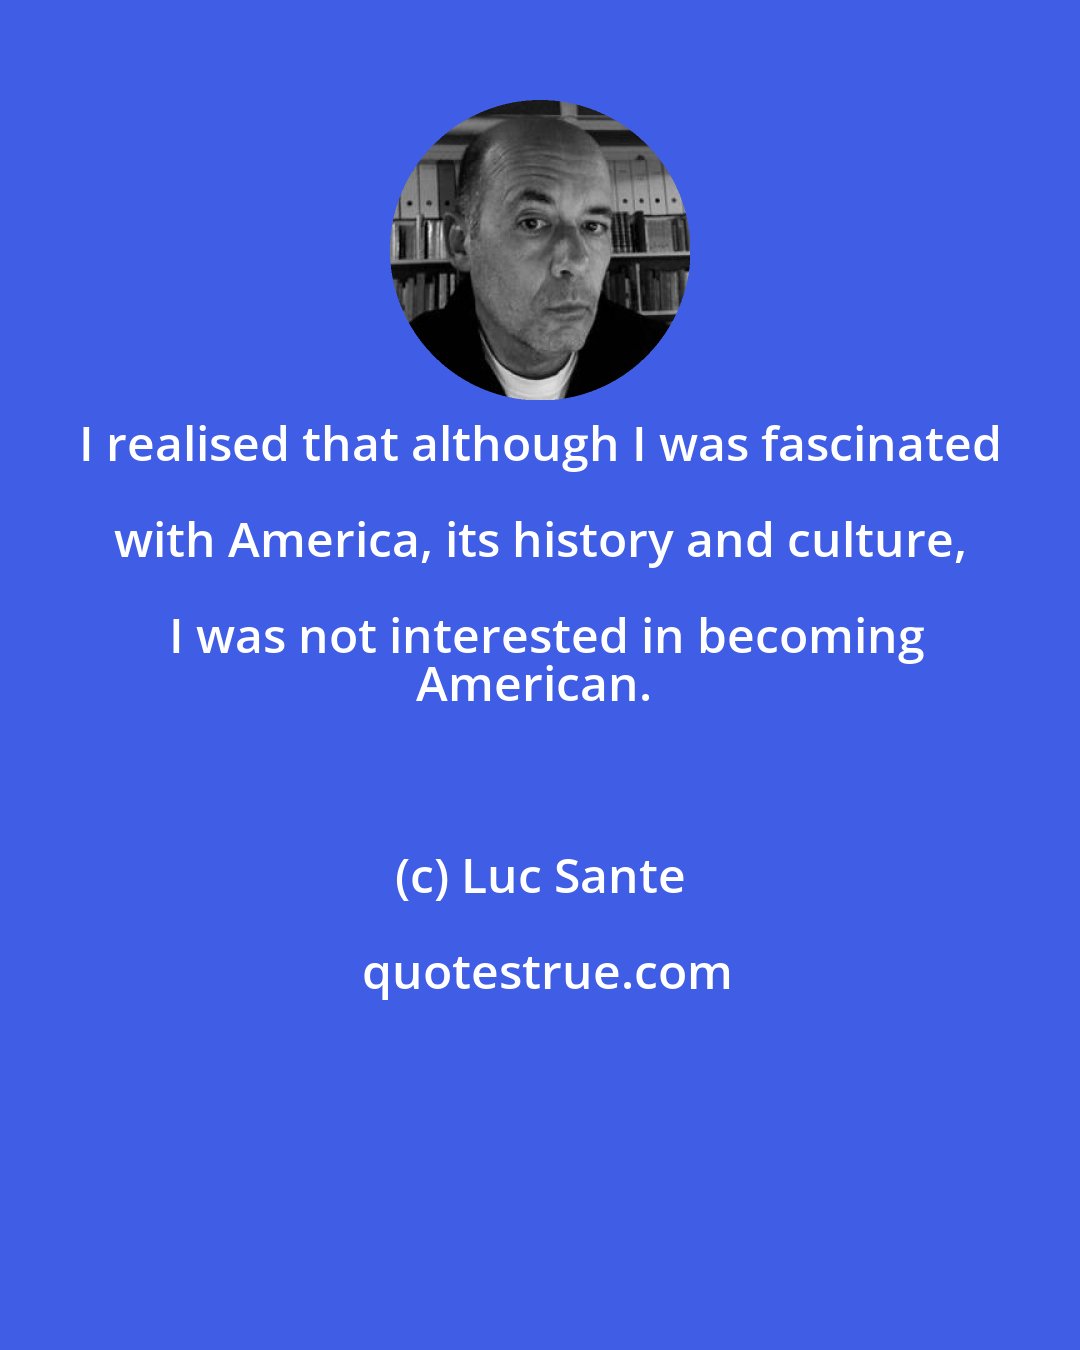 Luc Sante: I realised that although I was fascinated with America, its history and culture, I was not interested in becoming
American.